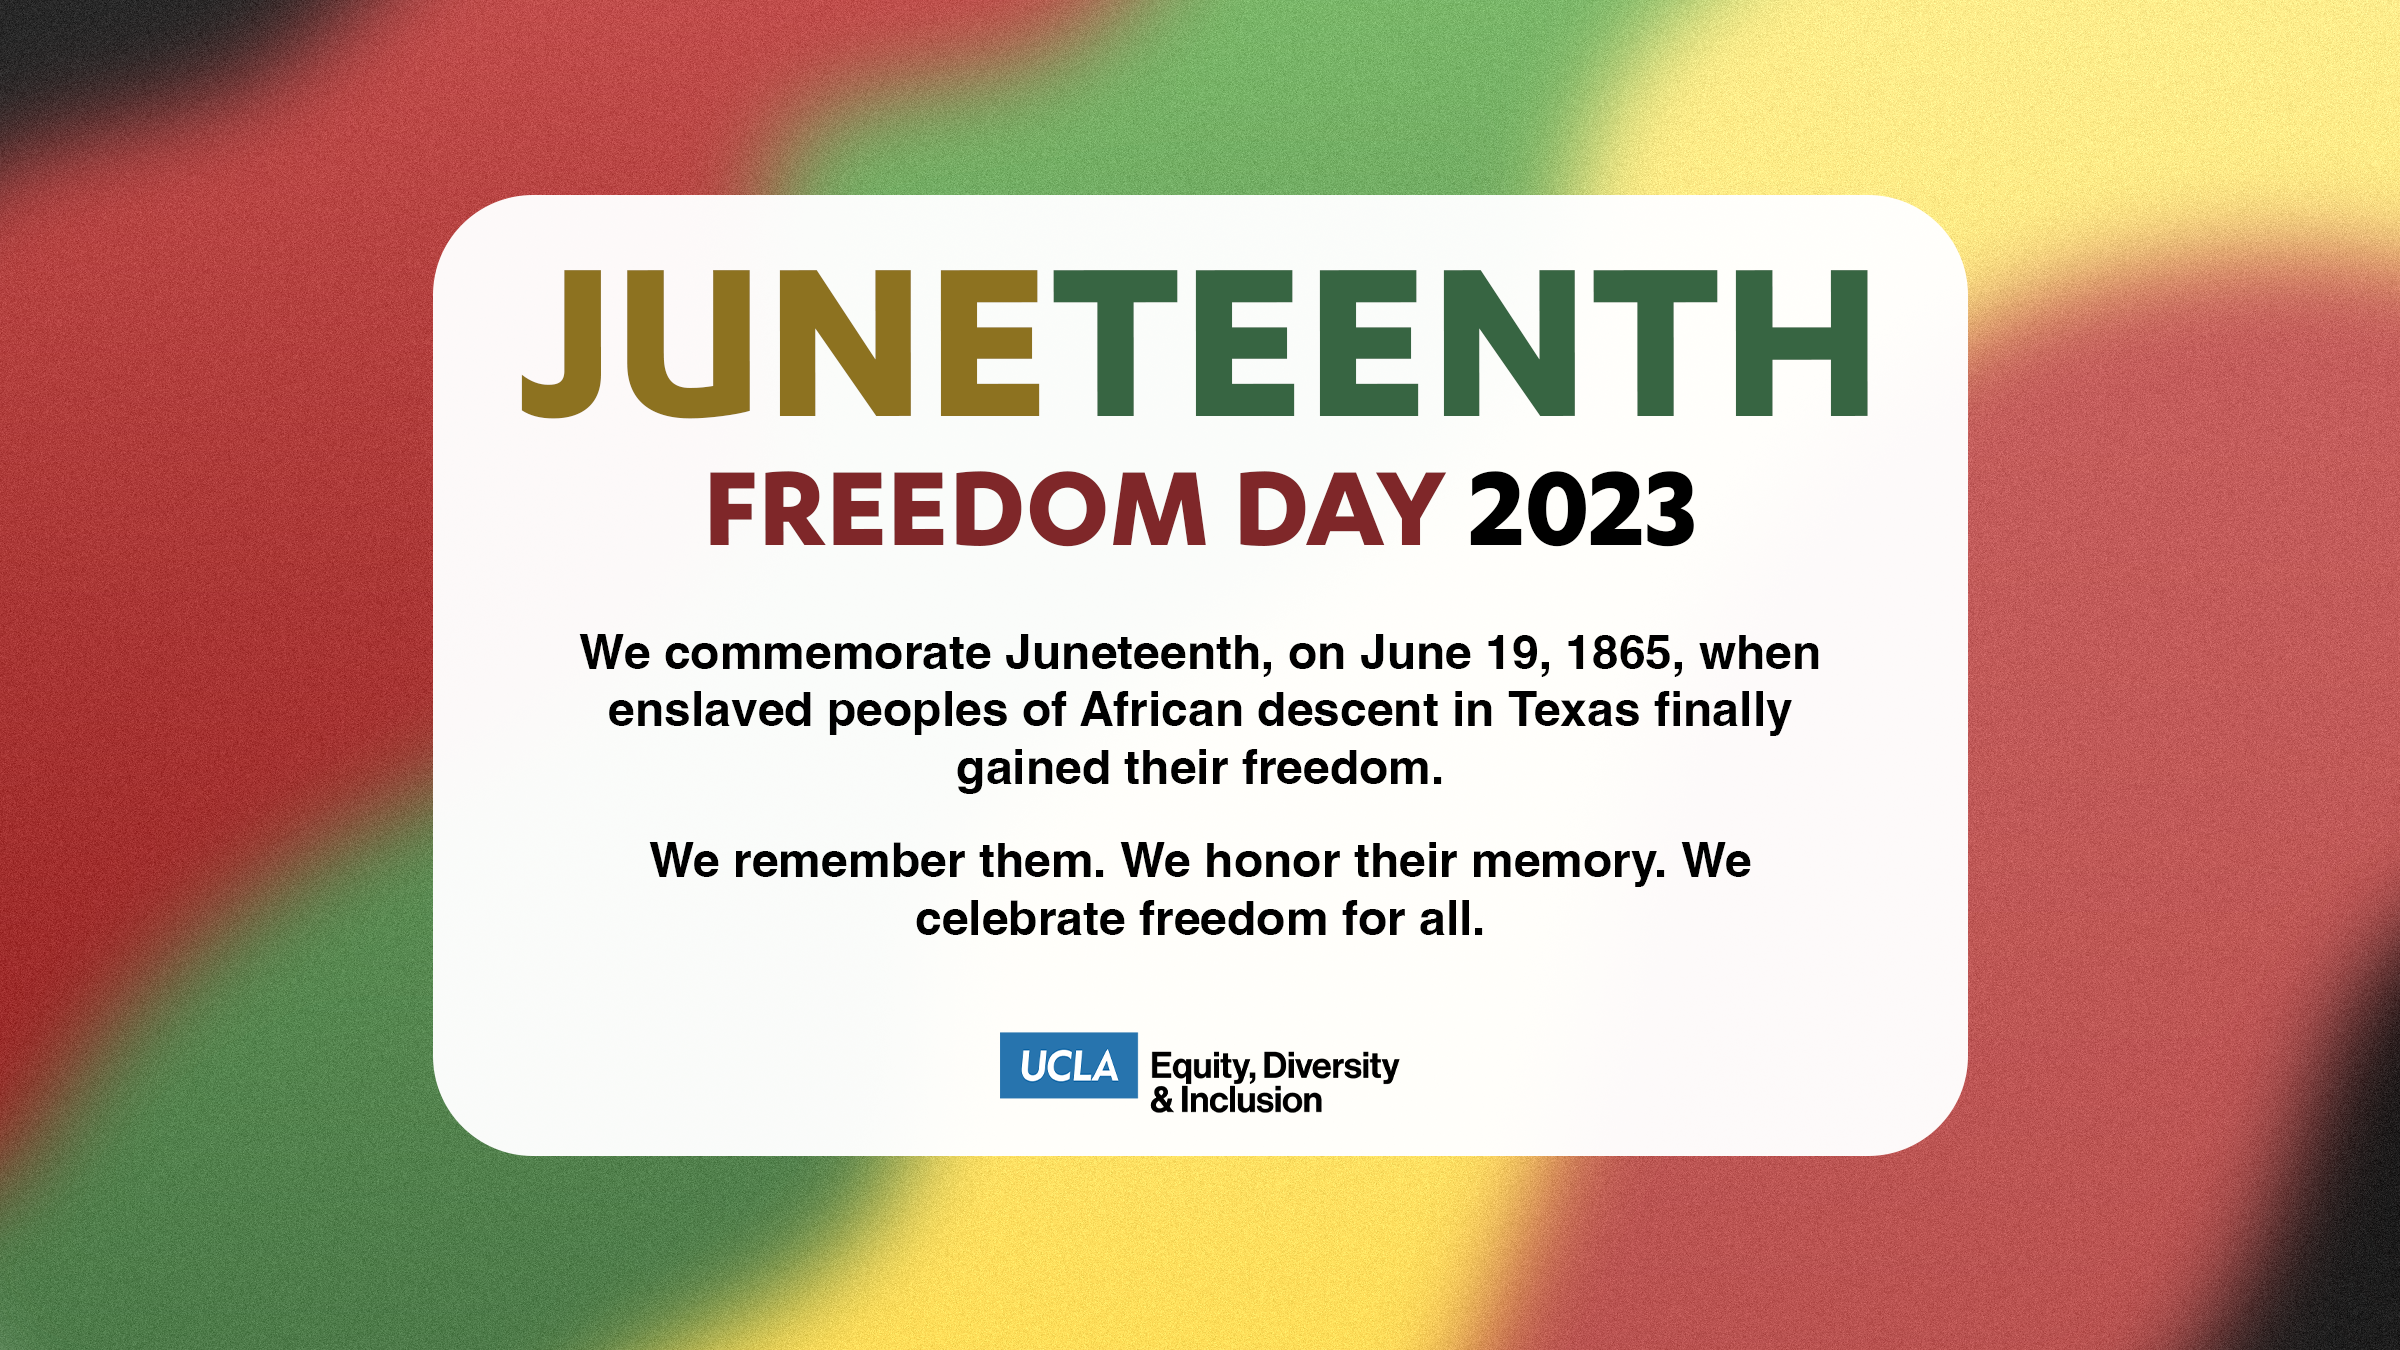 graphic commemorating juneteenth freedom day 2023. we commemorate juneteenth, on june 19, 1865, when enslaved peoples of african descent in texas finally gained their freedom. we remember them. we honor their memory. we celebrate freedom for all.